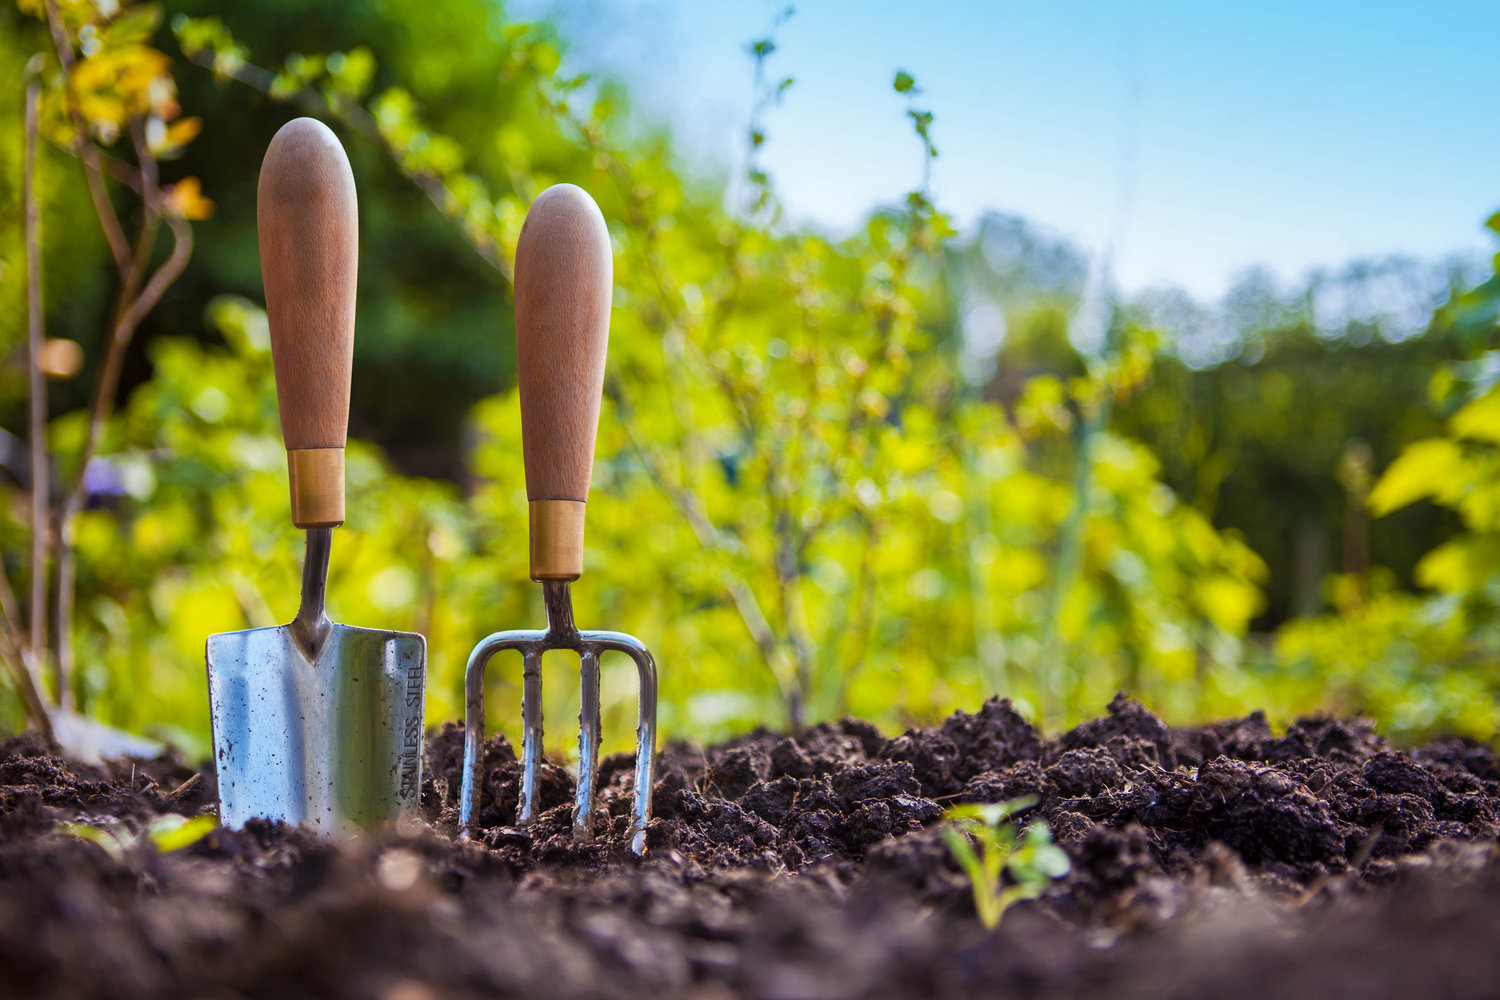  The right tools for the job will help get your garden ready for spring. 